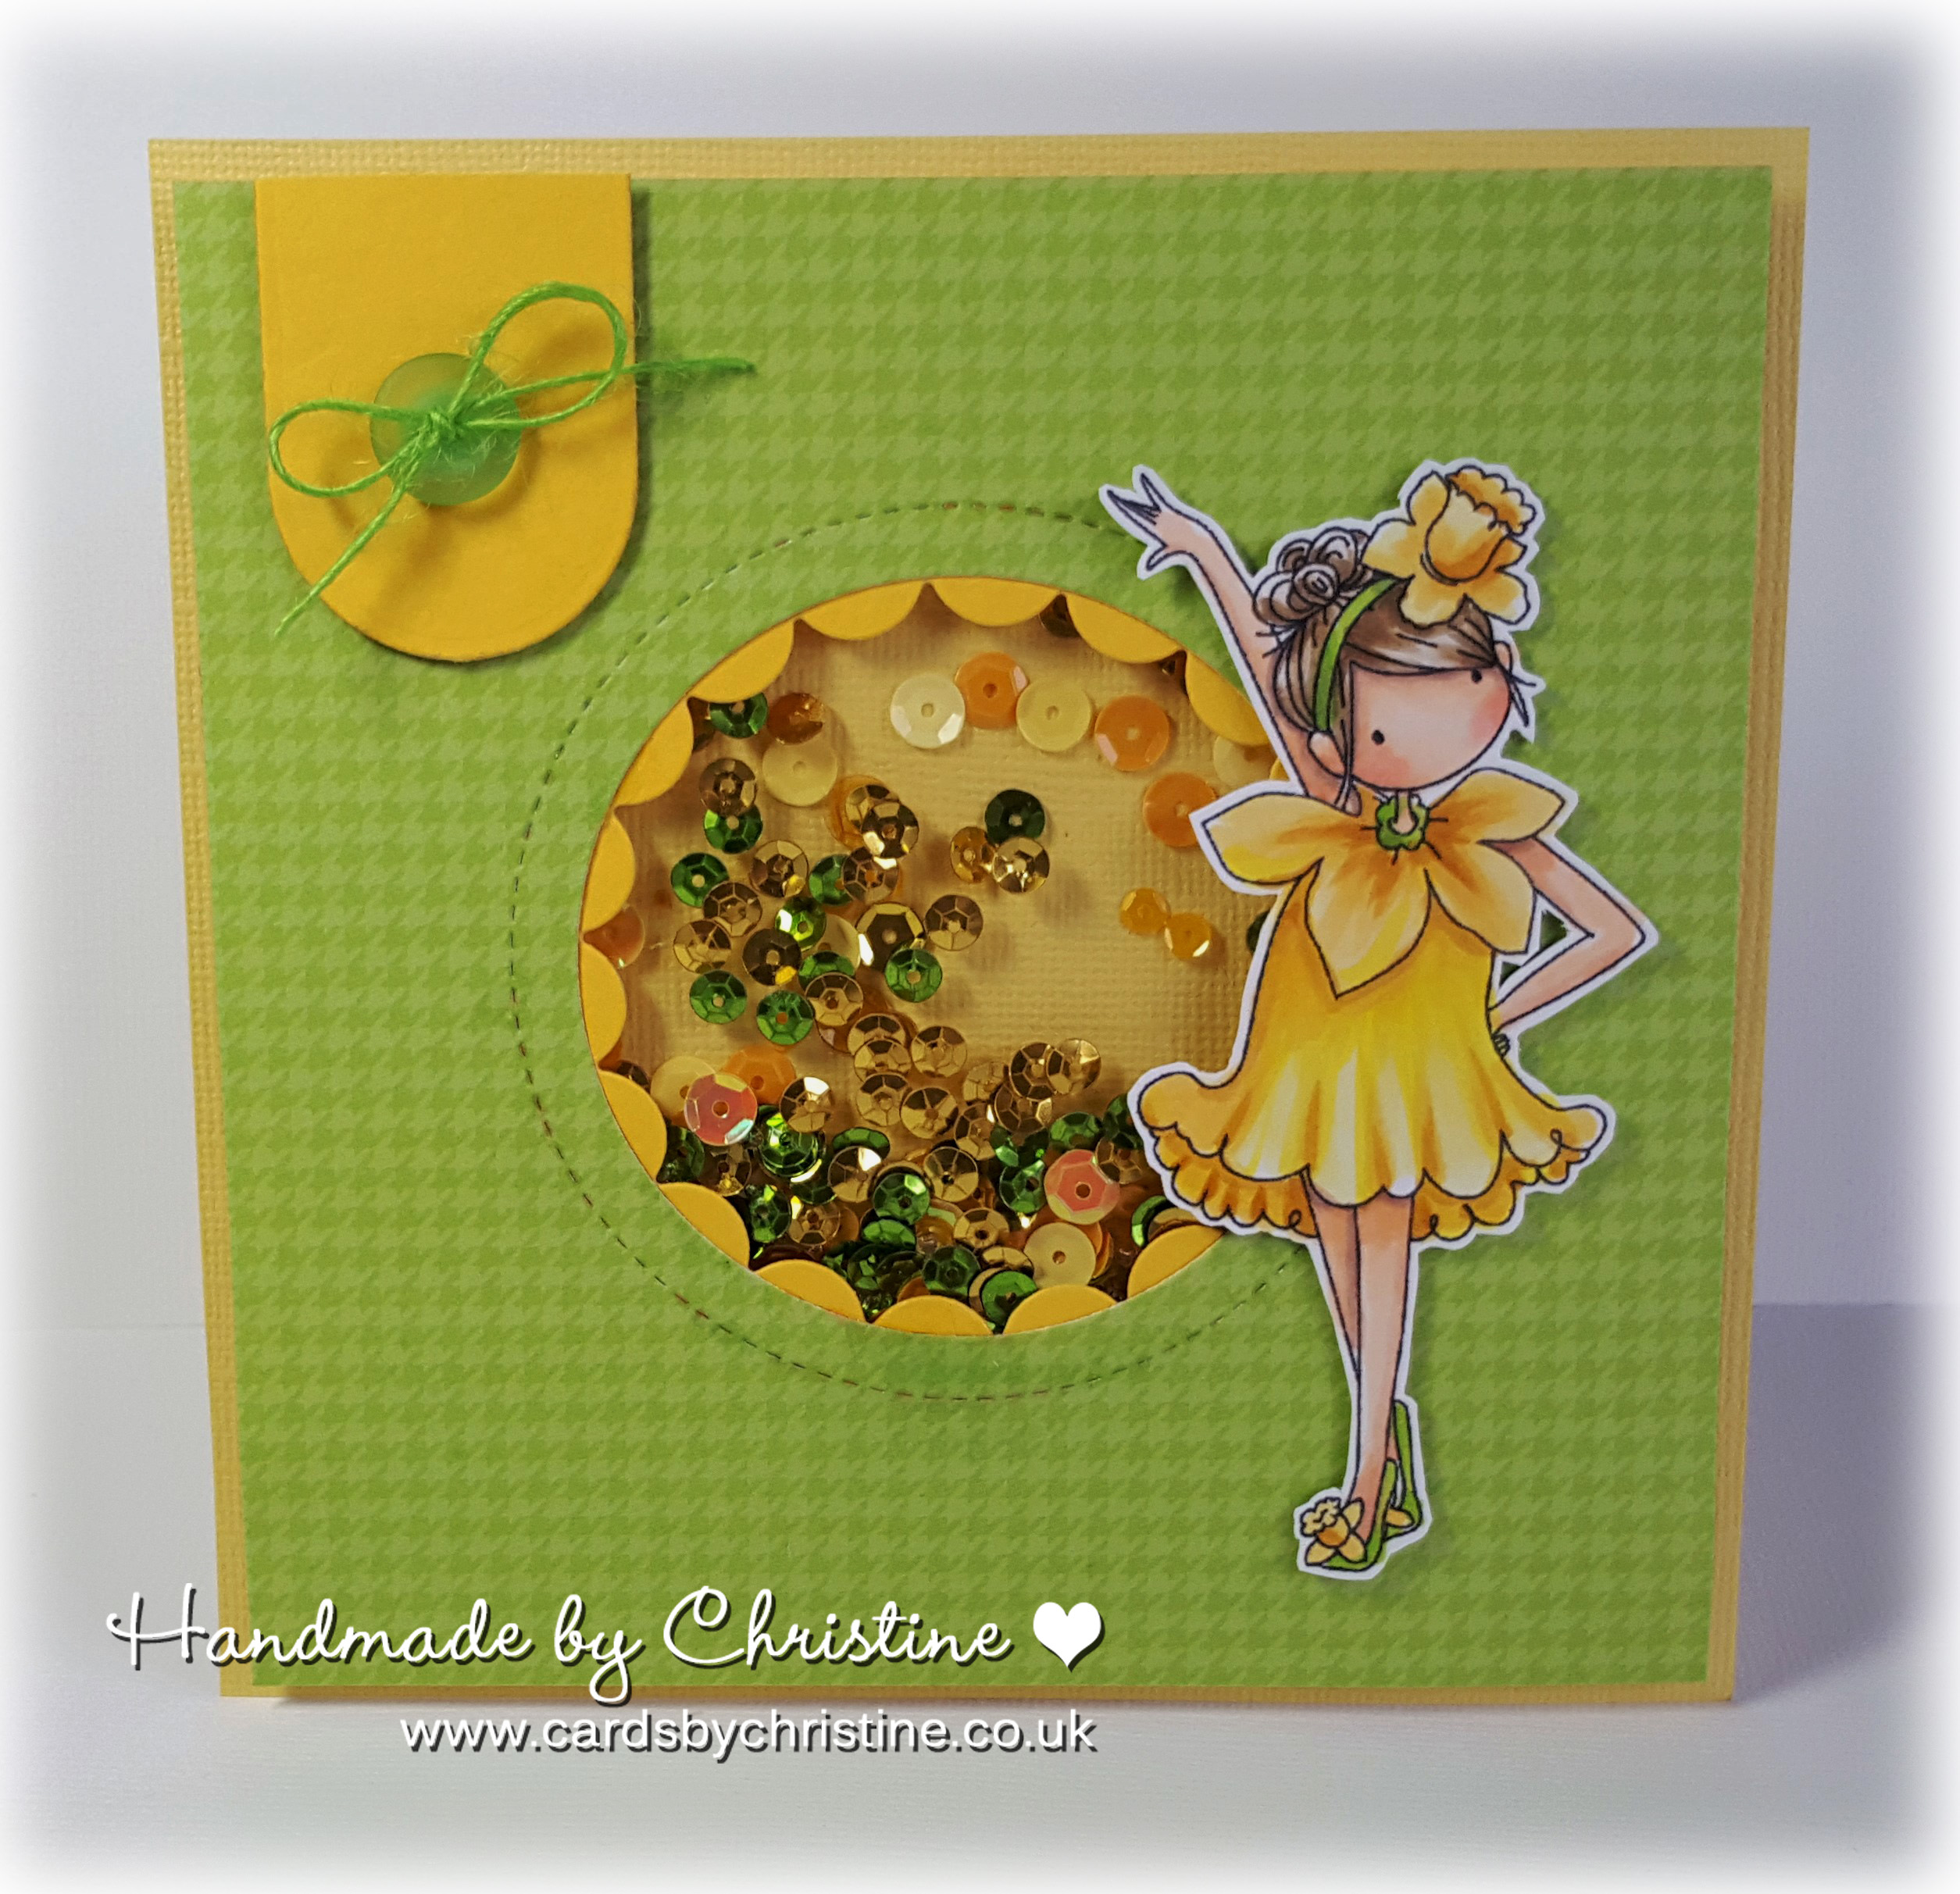 Stamping Bella Sneak Peek March 2017- TINY TOWNIE GARDEN GIRL DAFFODIL RUBBER STAMP. CARD BY CHRISTINE LEVISON